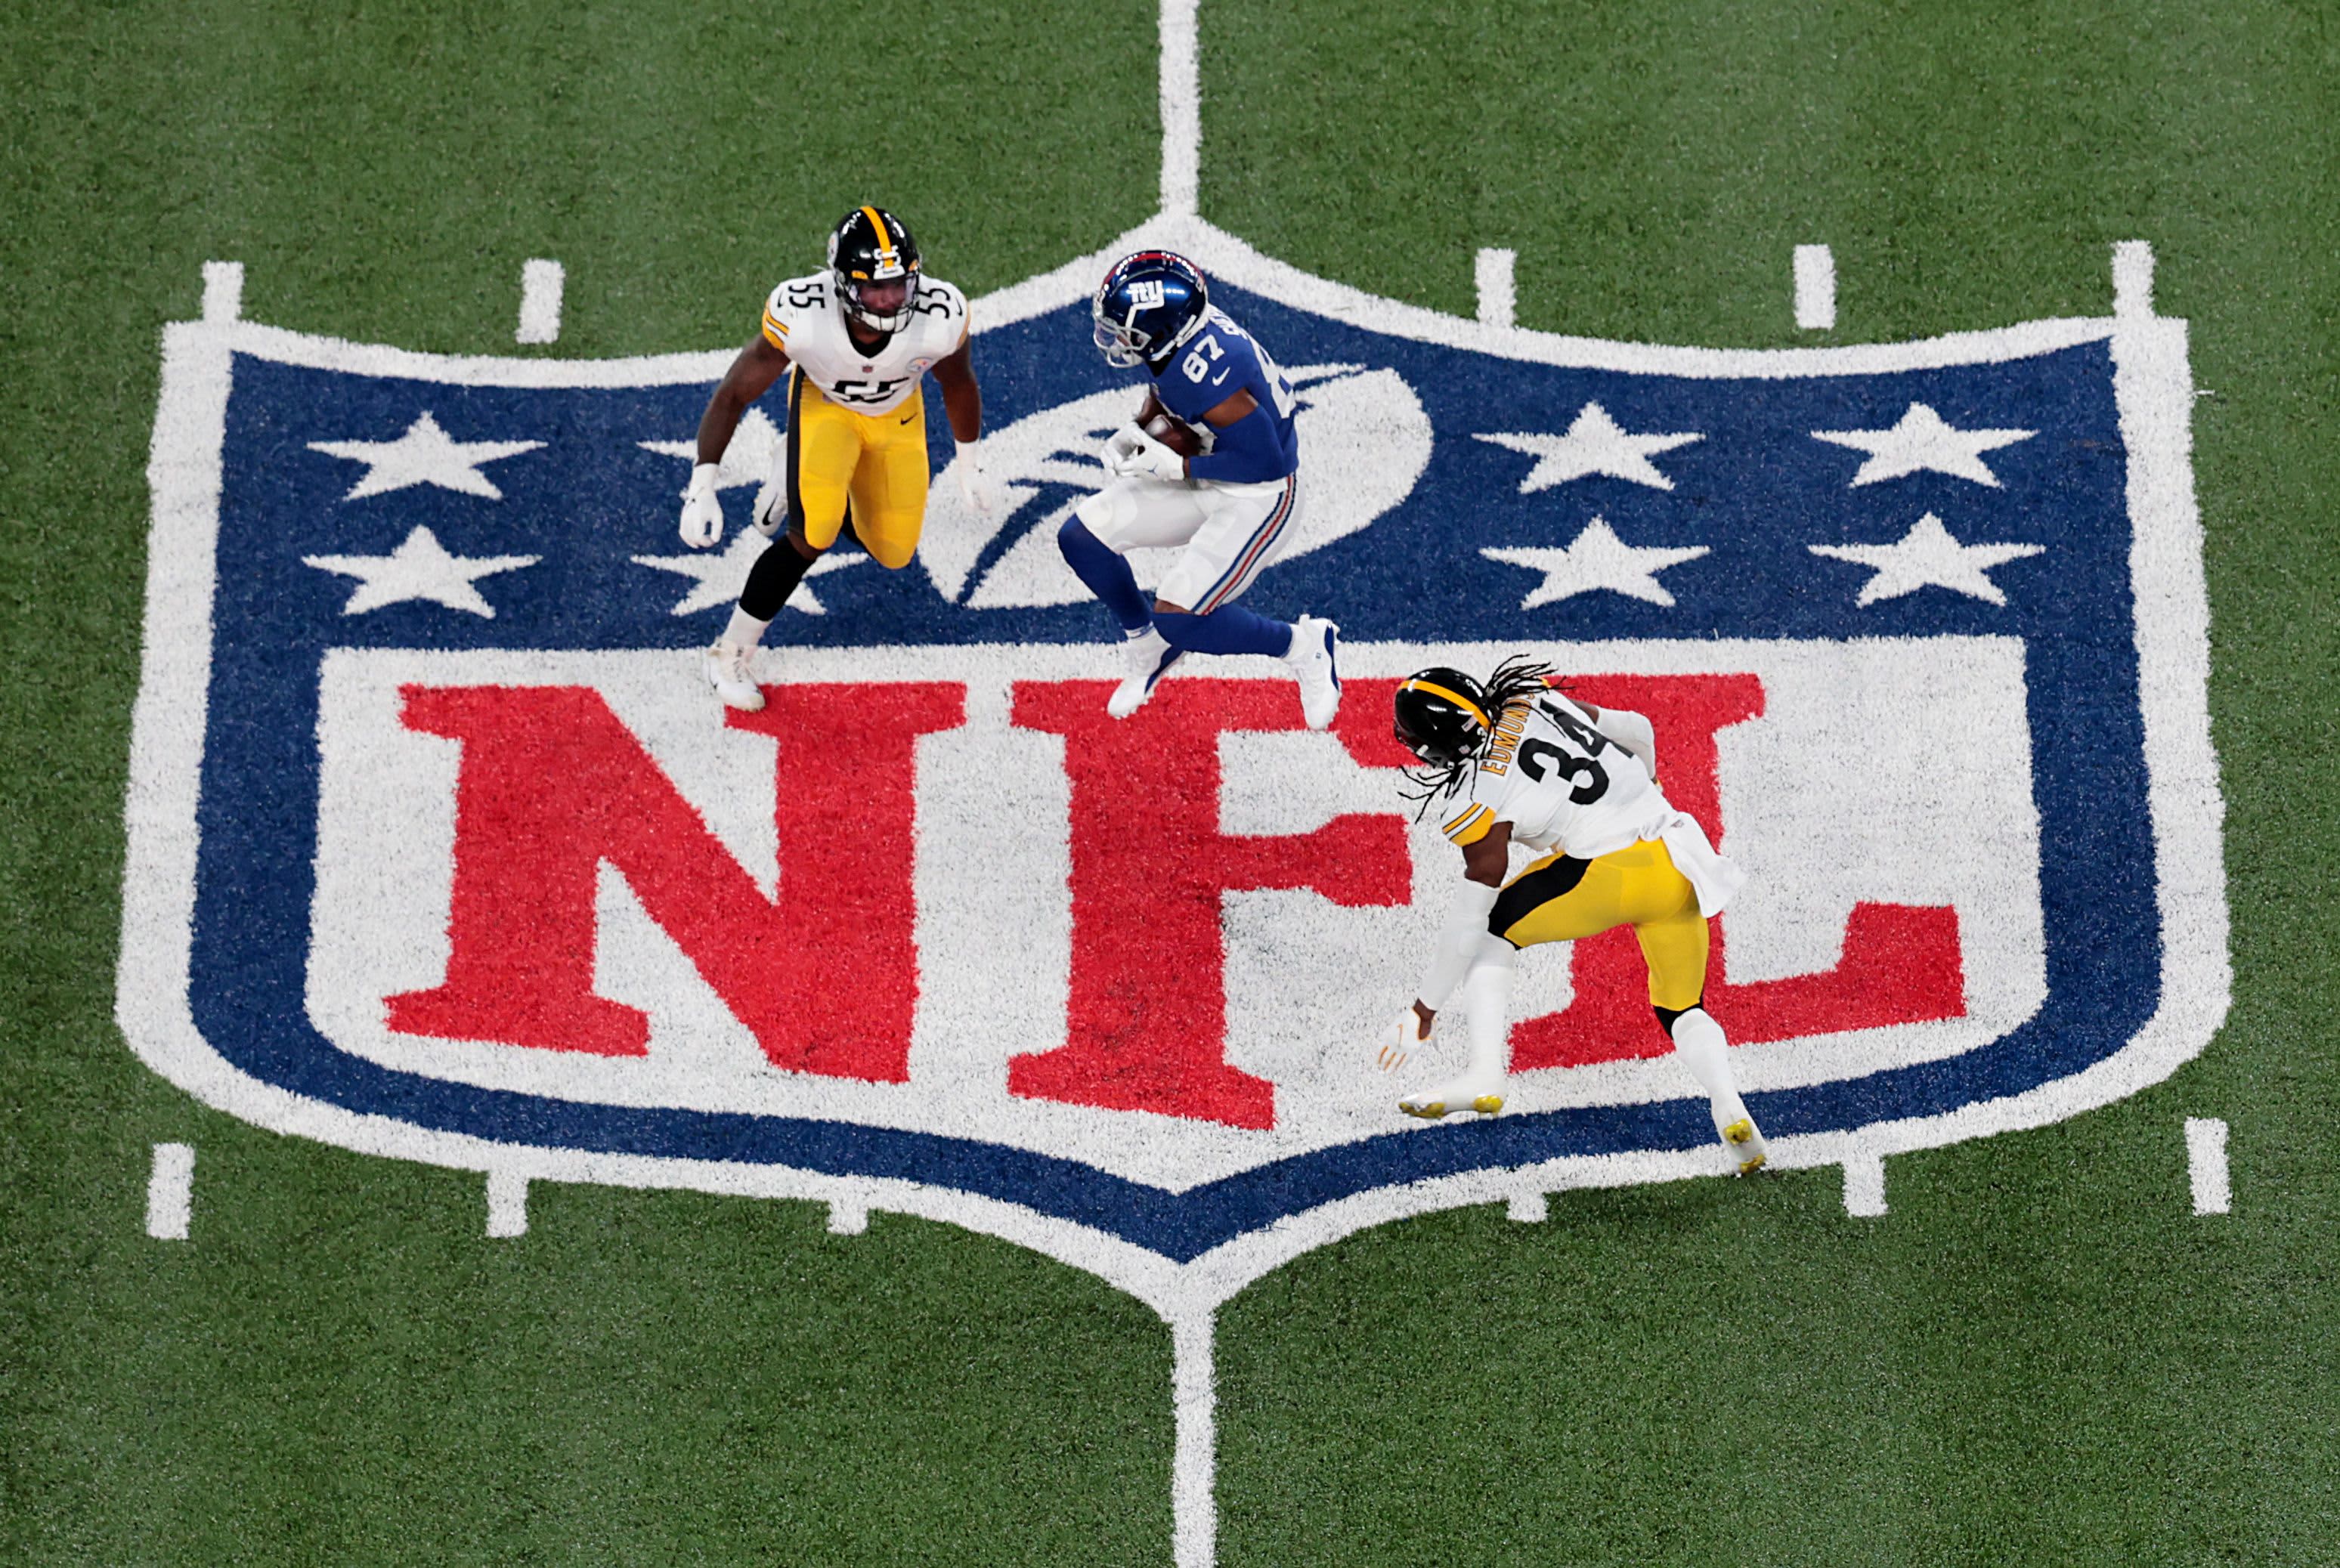 Weekly Cable Ratings: 'Monday Night Football' Paces ESPN Primetime Win